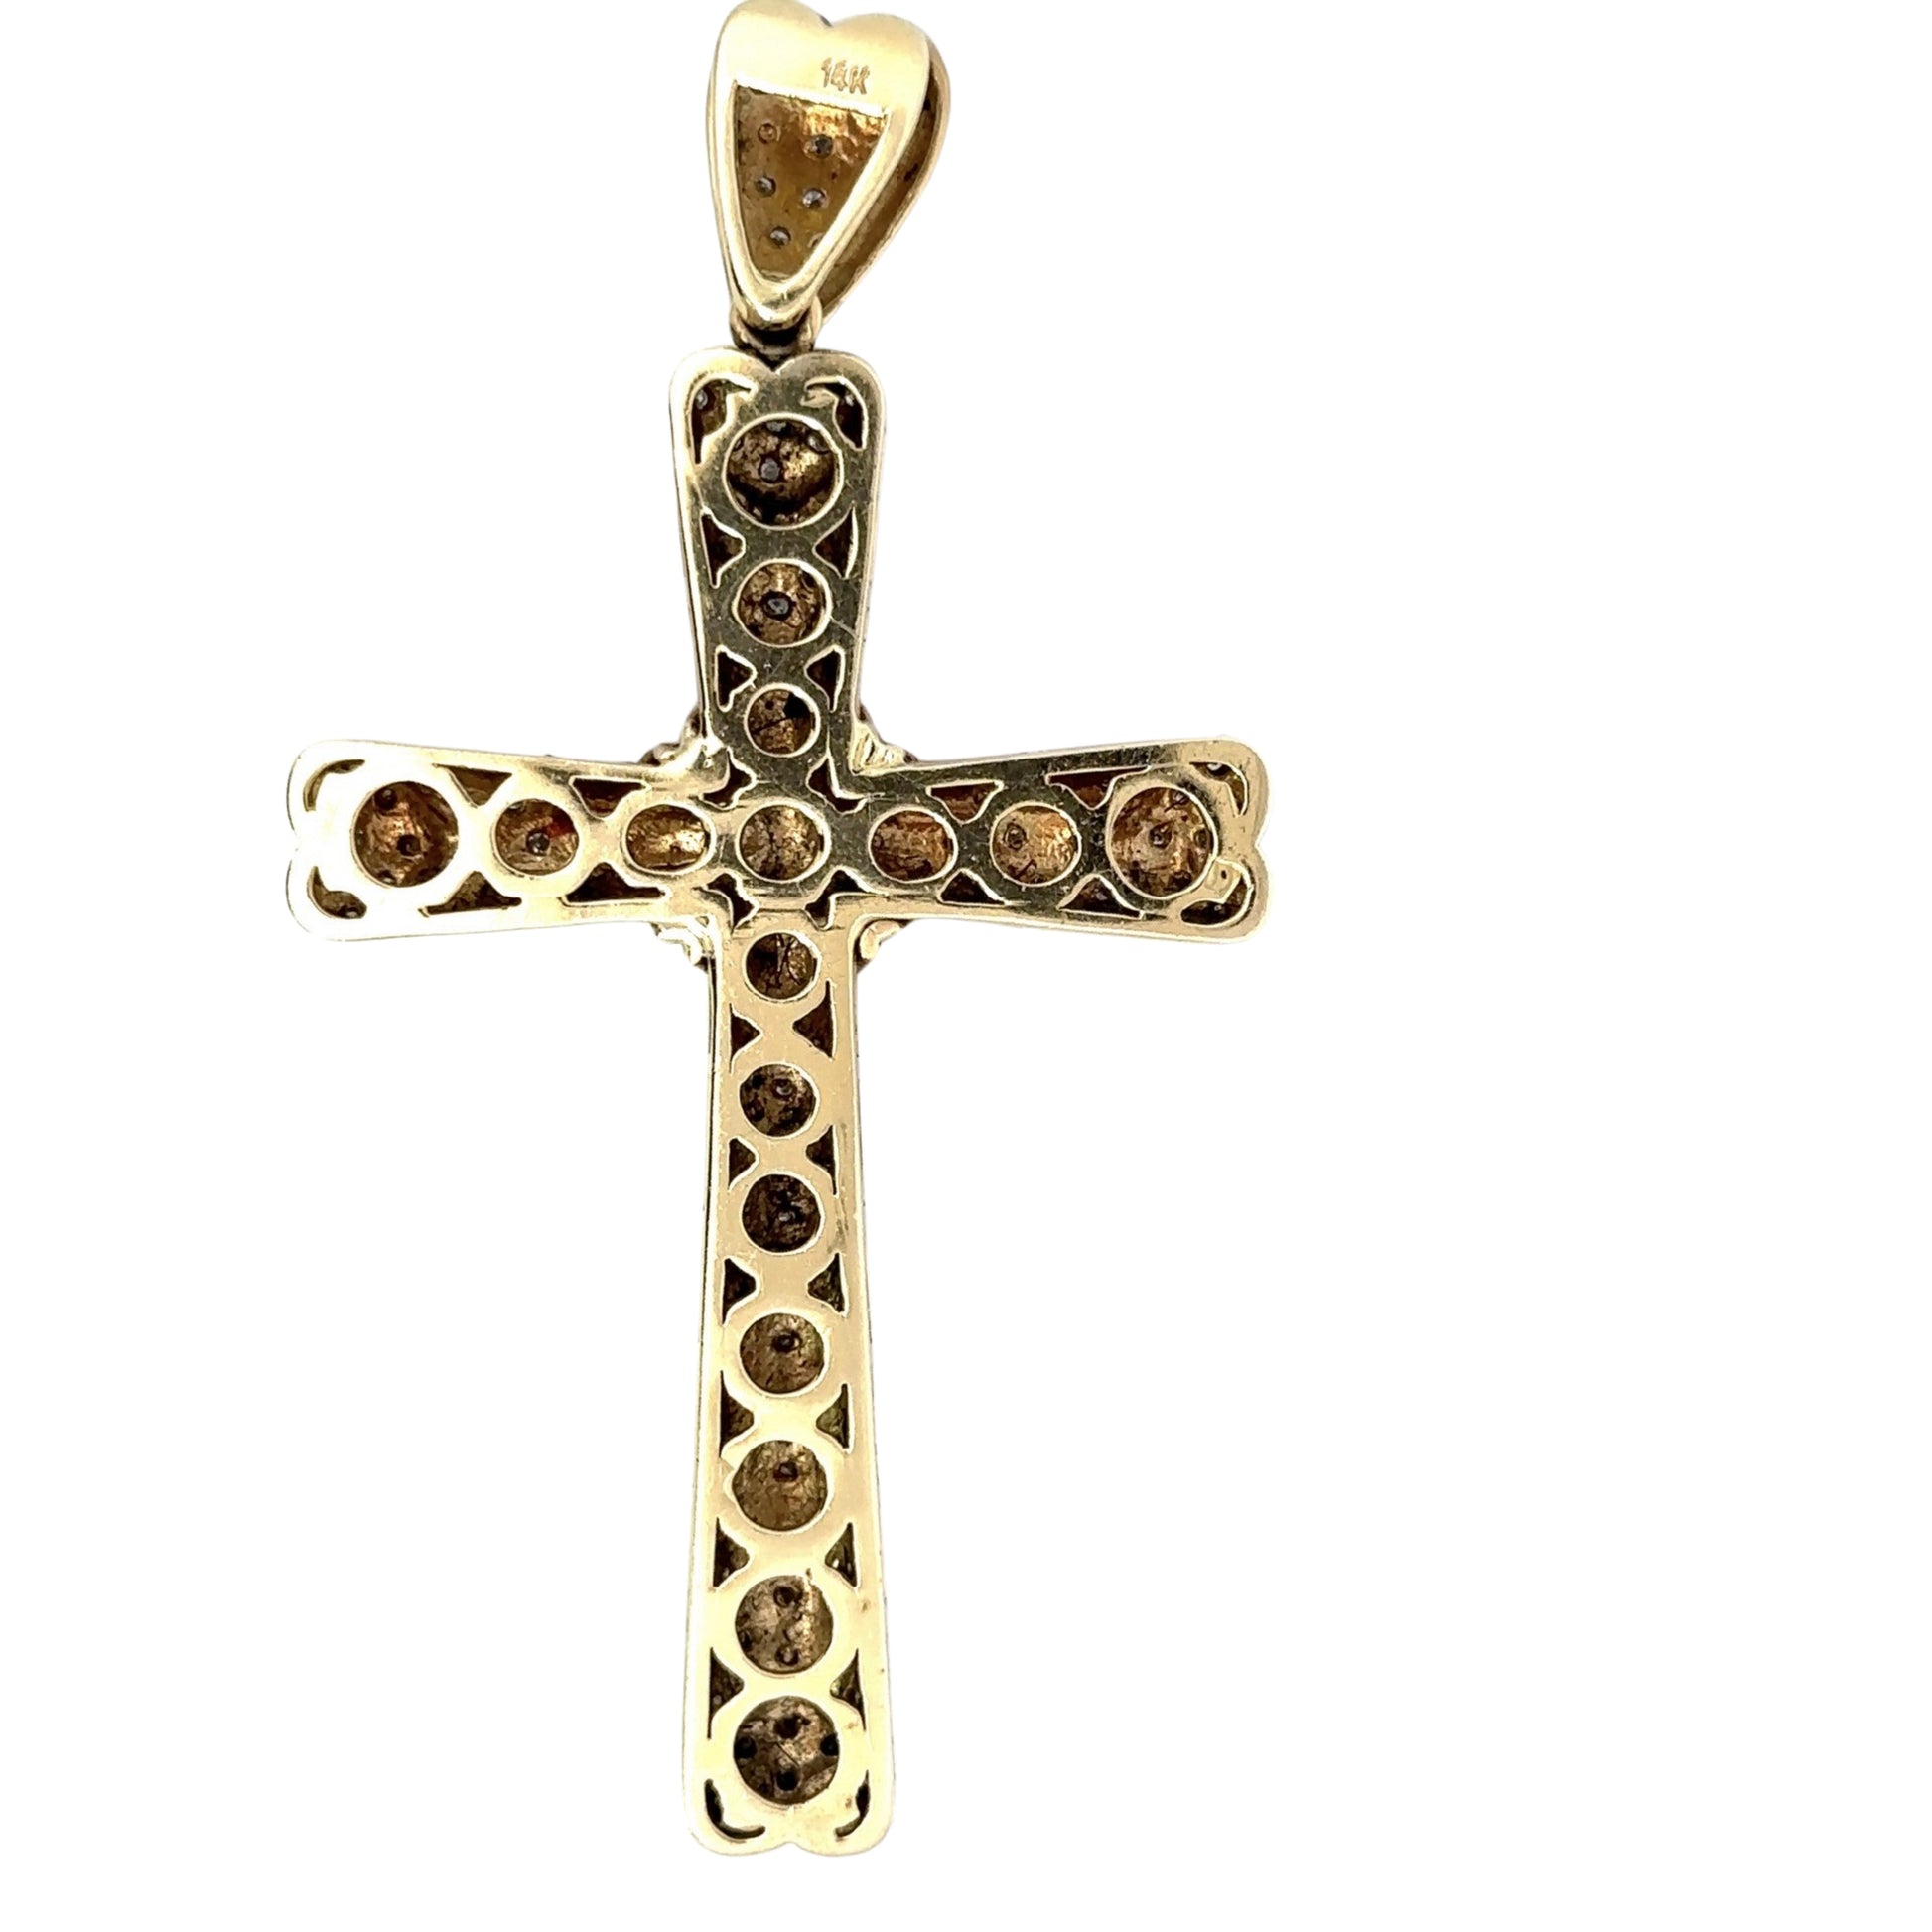 Back of cross with hollow gold and 14K stamp